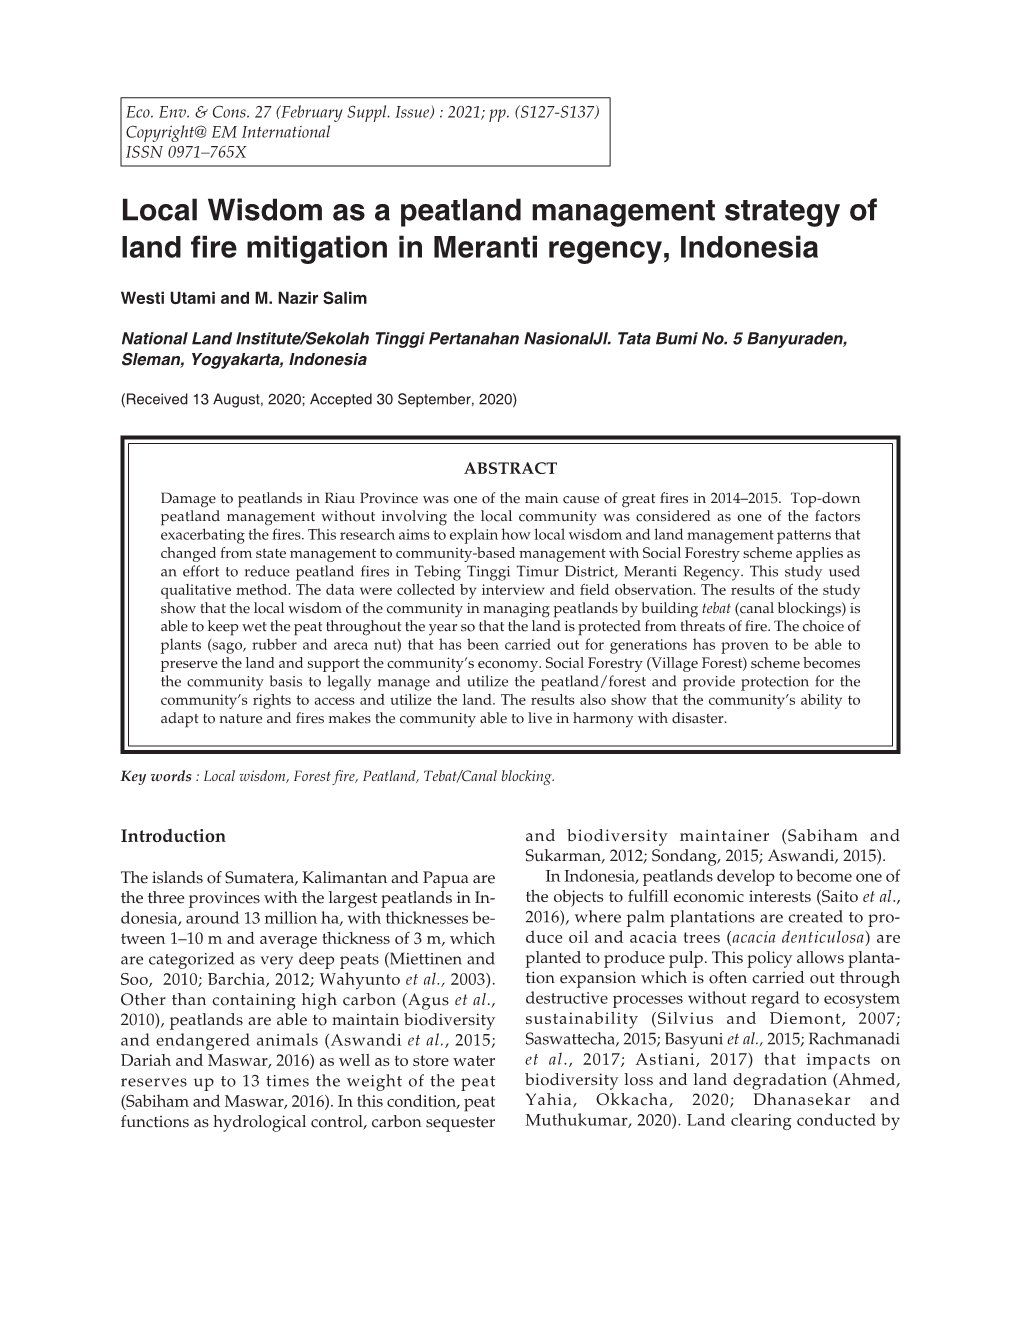 Local Wisdom As a Peatland Management Strategy of Land Fire Mitigation in Meranti Regency, Indonesia